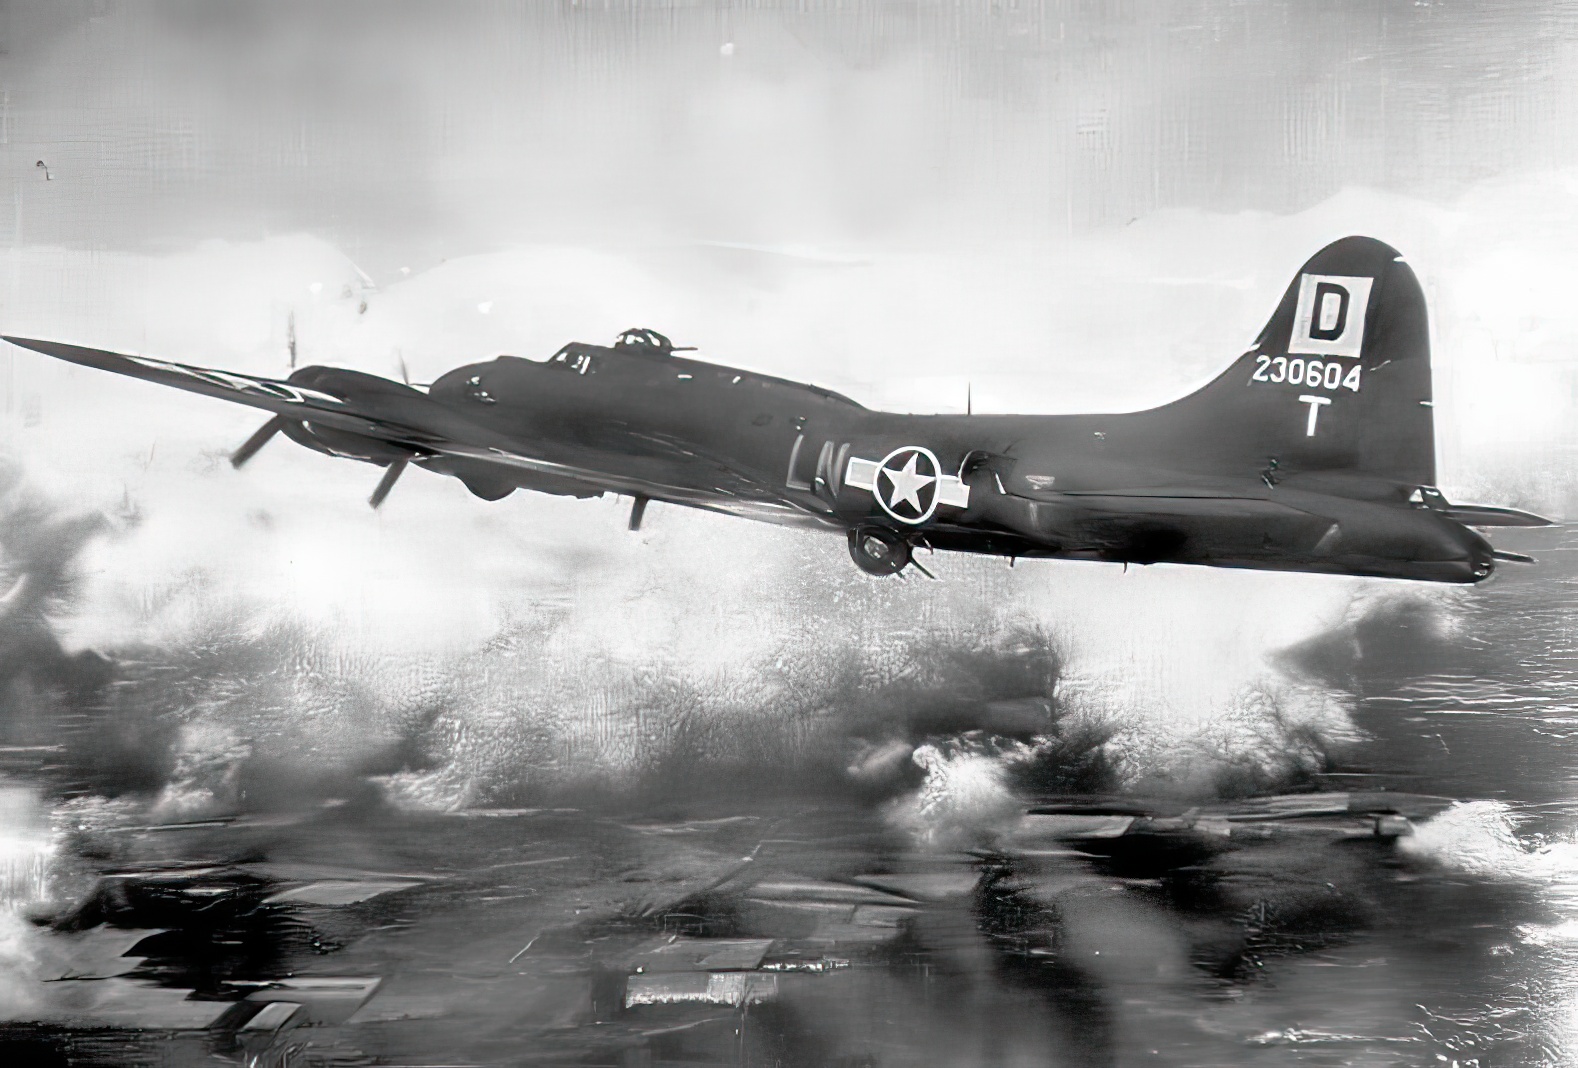 B-17 of the 350th Bombardment Squadron, 100th Bombardment Group